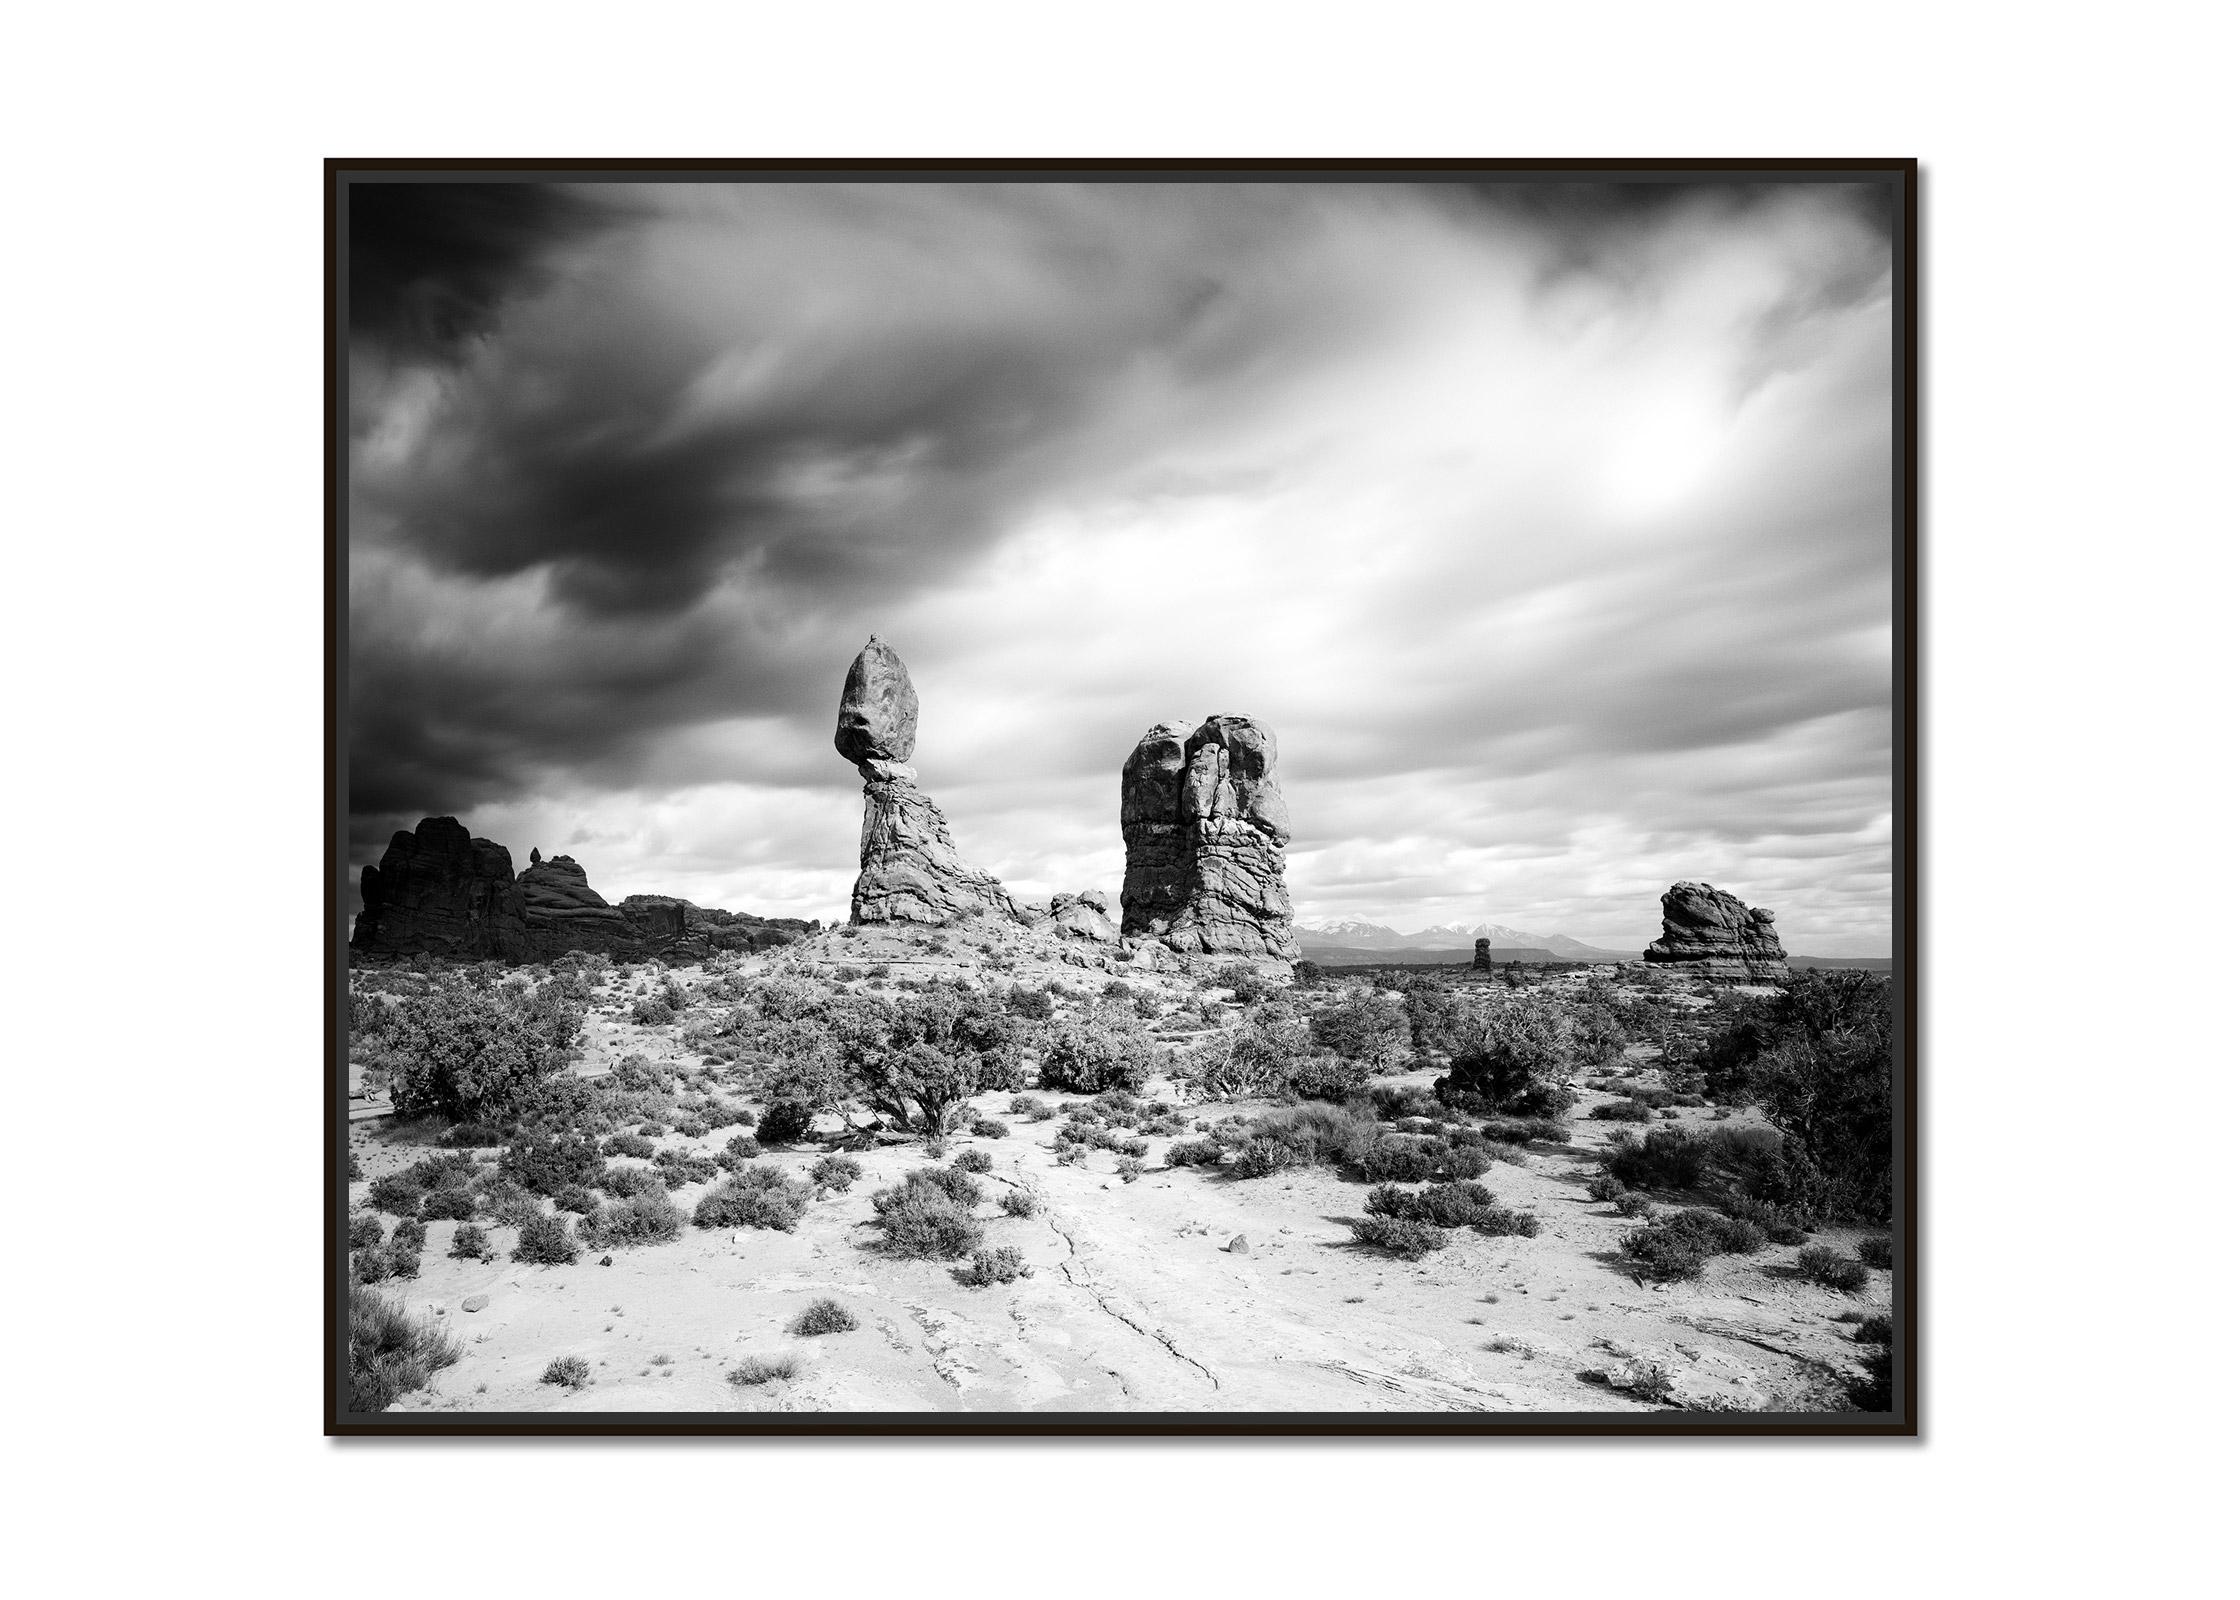 Balanced Rock, Arches National Park, USA, black and white photography, landscape - Photograph by Gerald Berghammer